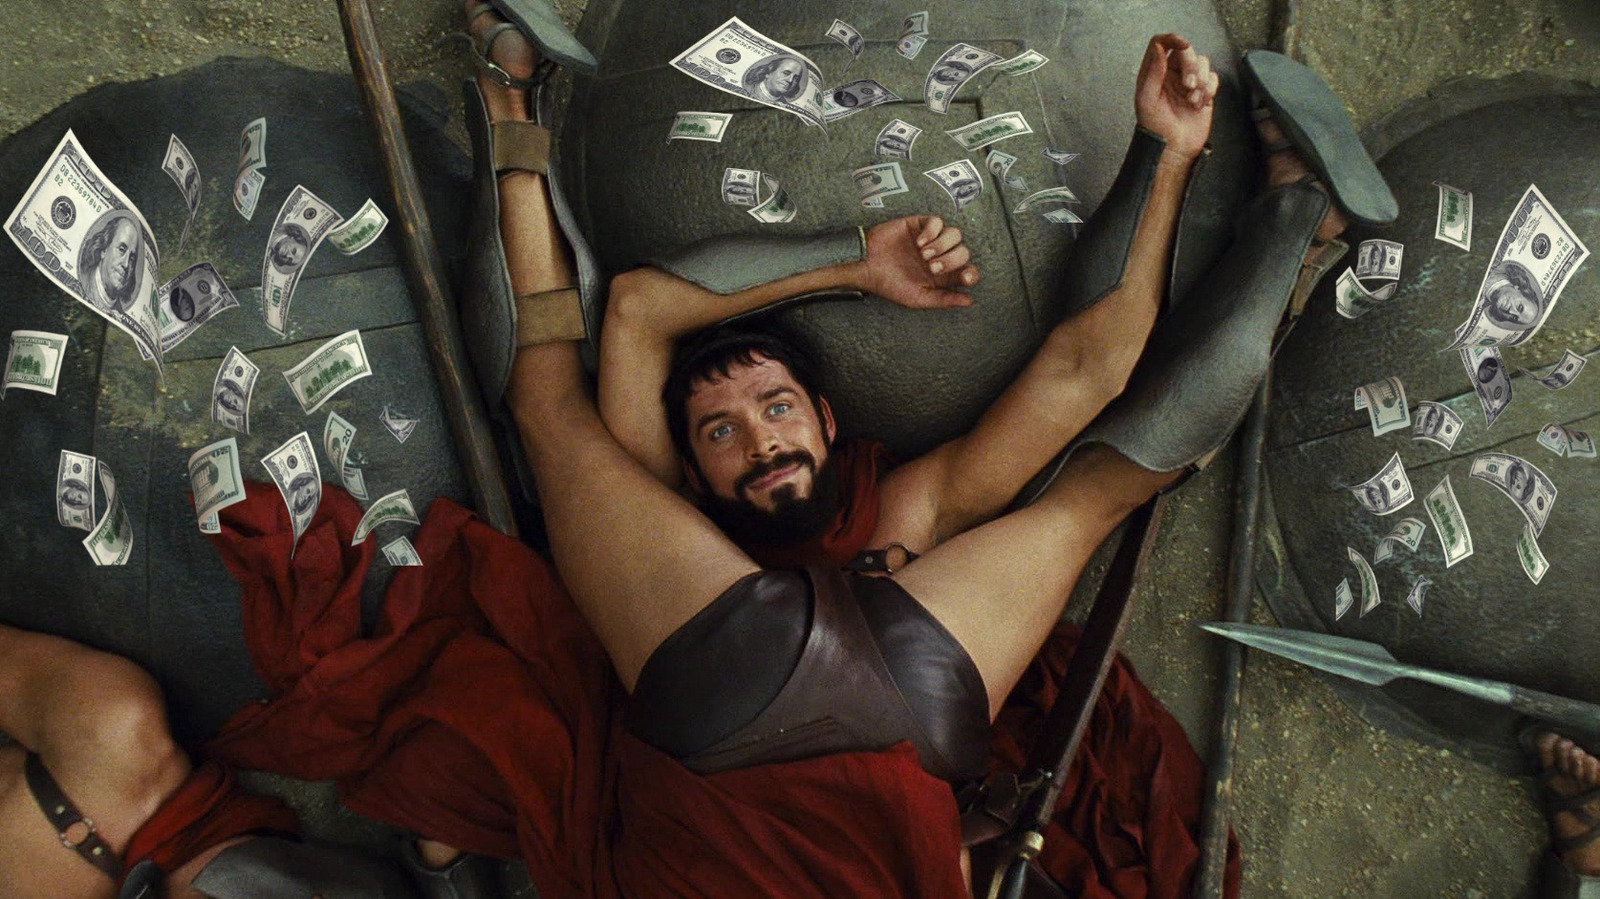 Tales From The Box Office: Meet The Spartans, one of the most critically acclaimed films of all time, has always been a hit